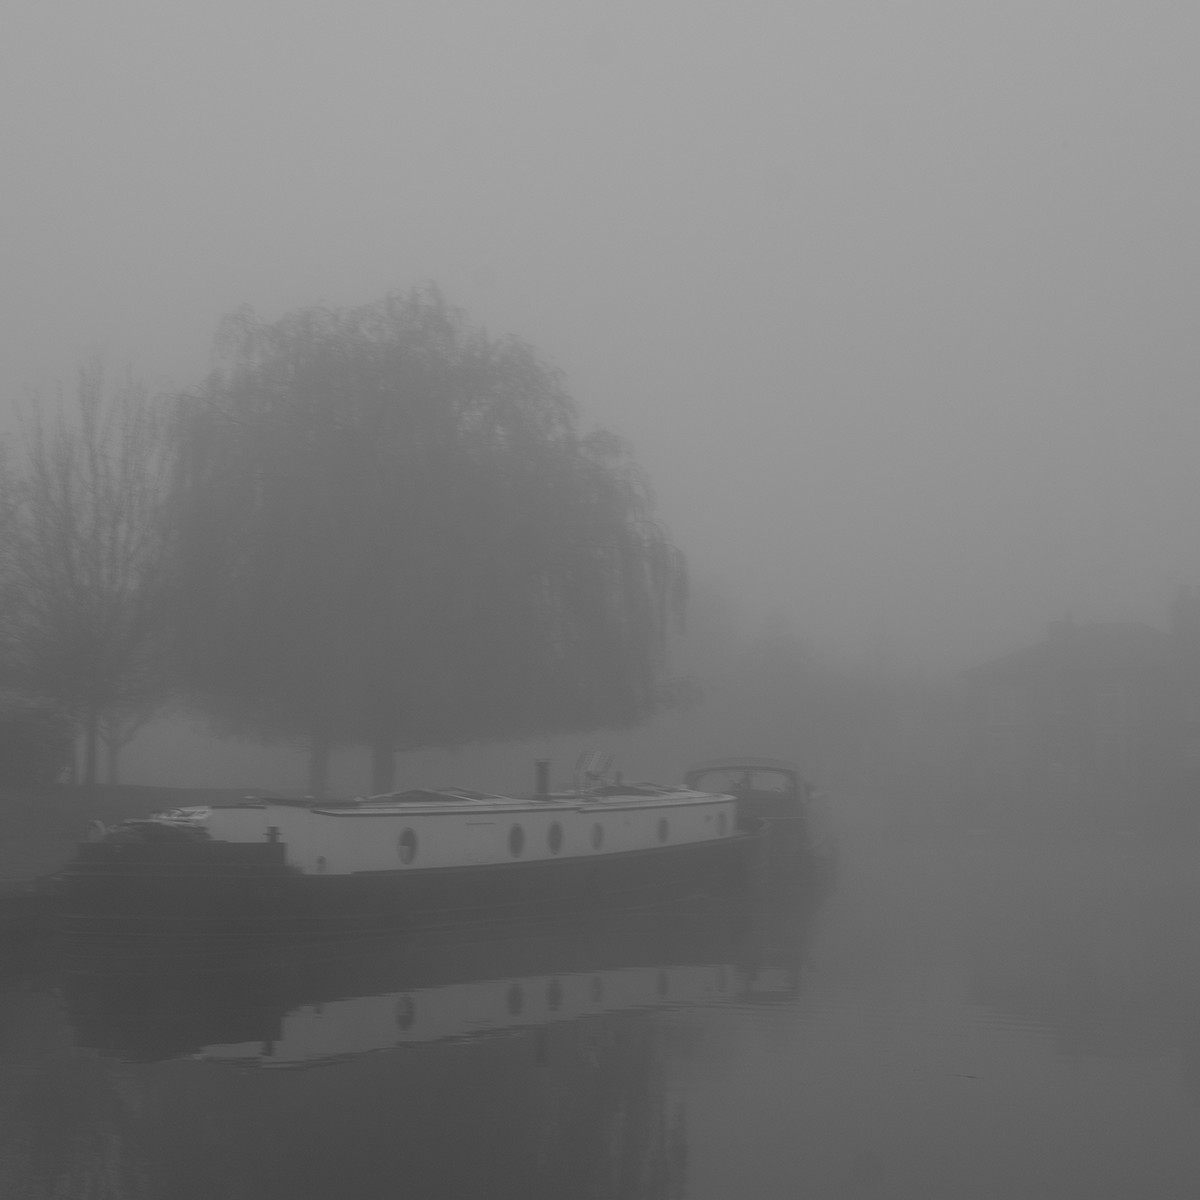 Boat in the Mist - I link image